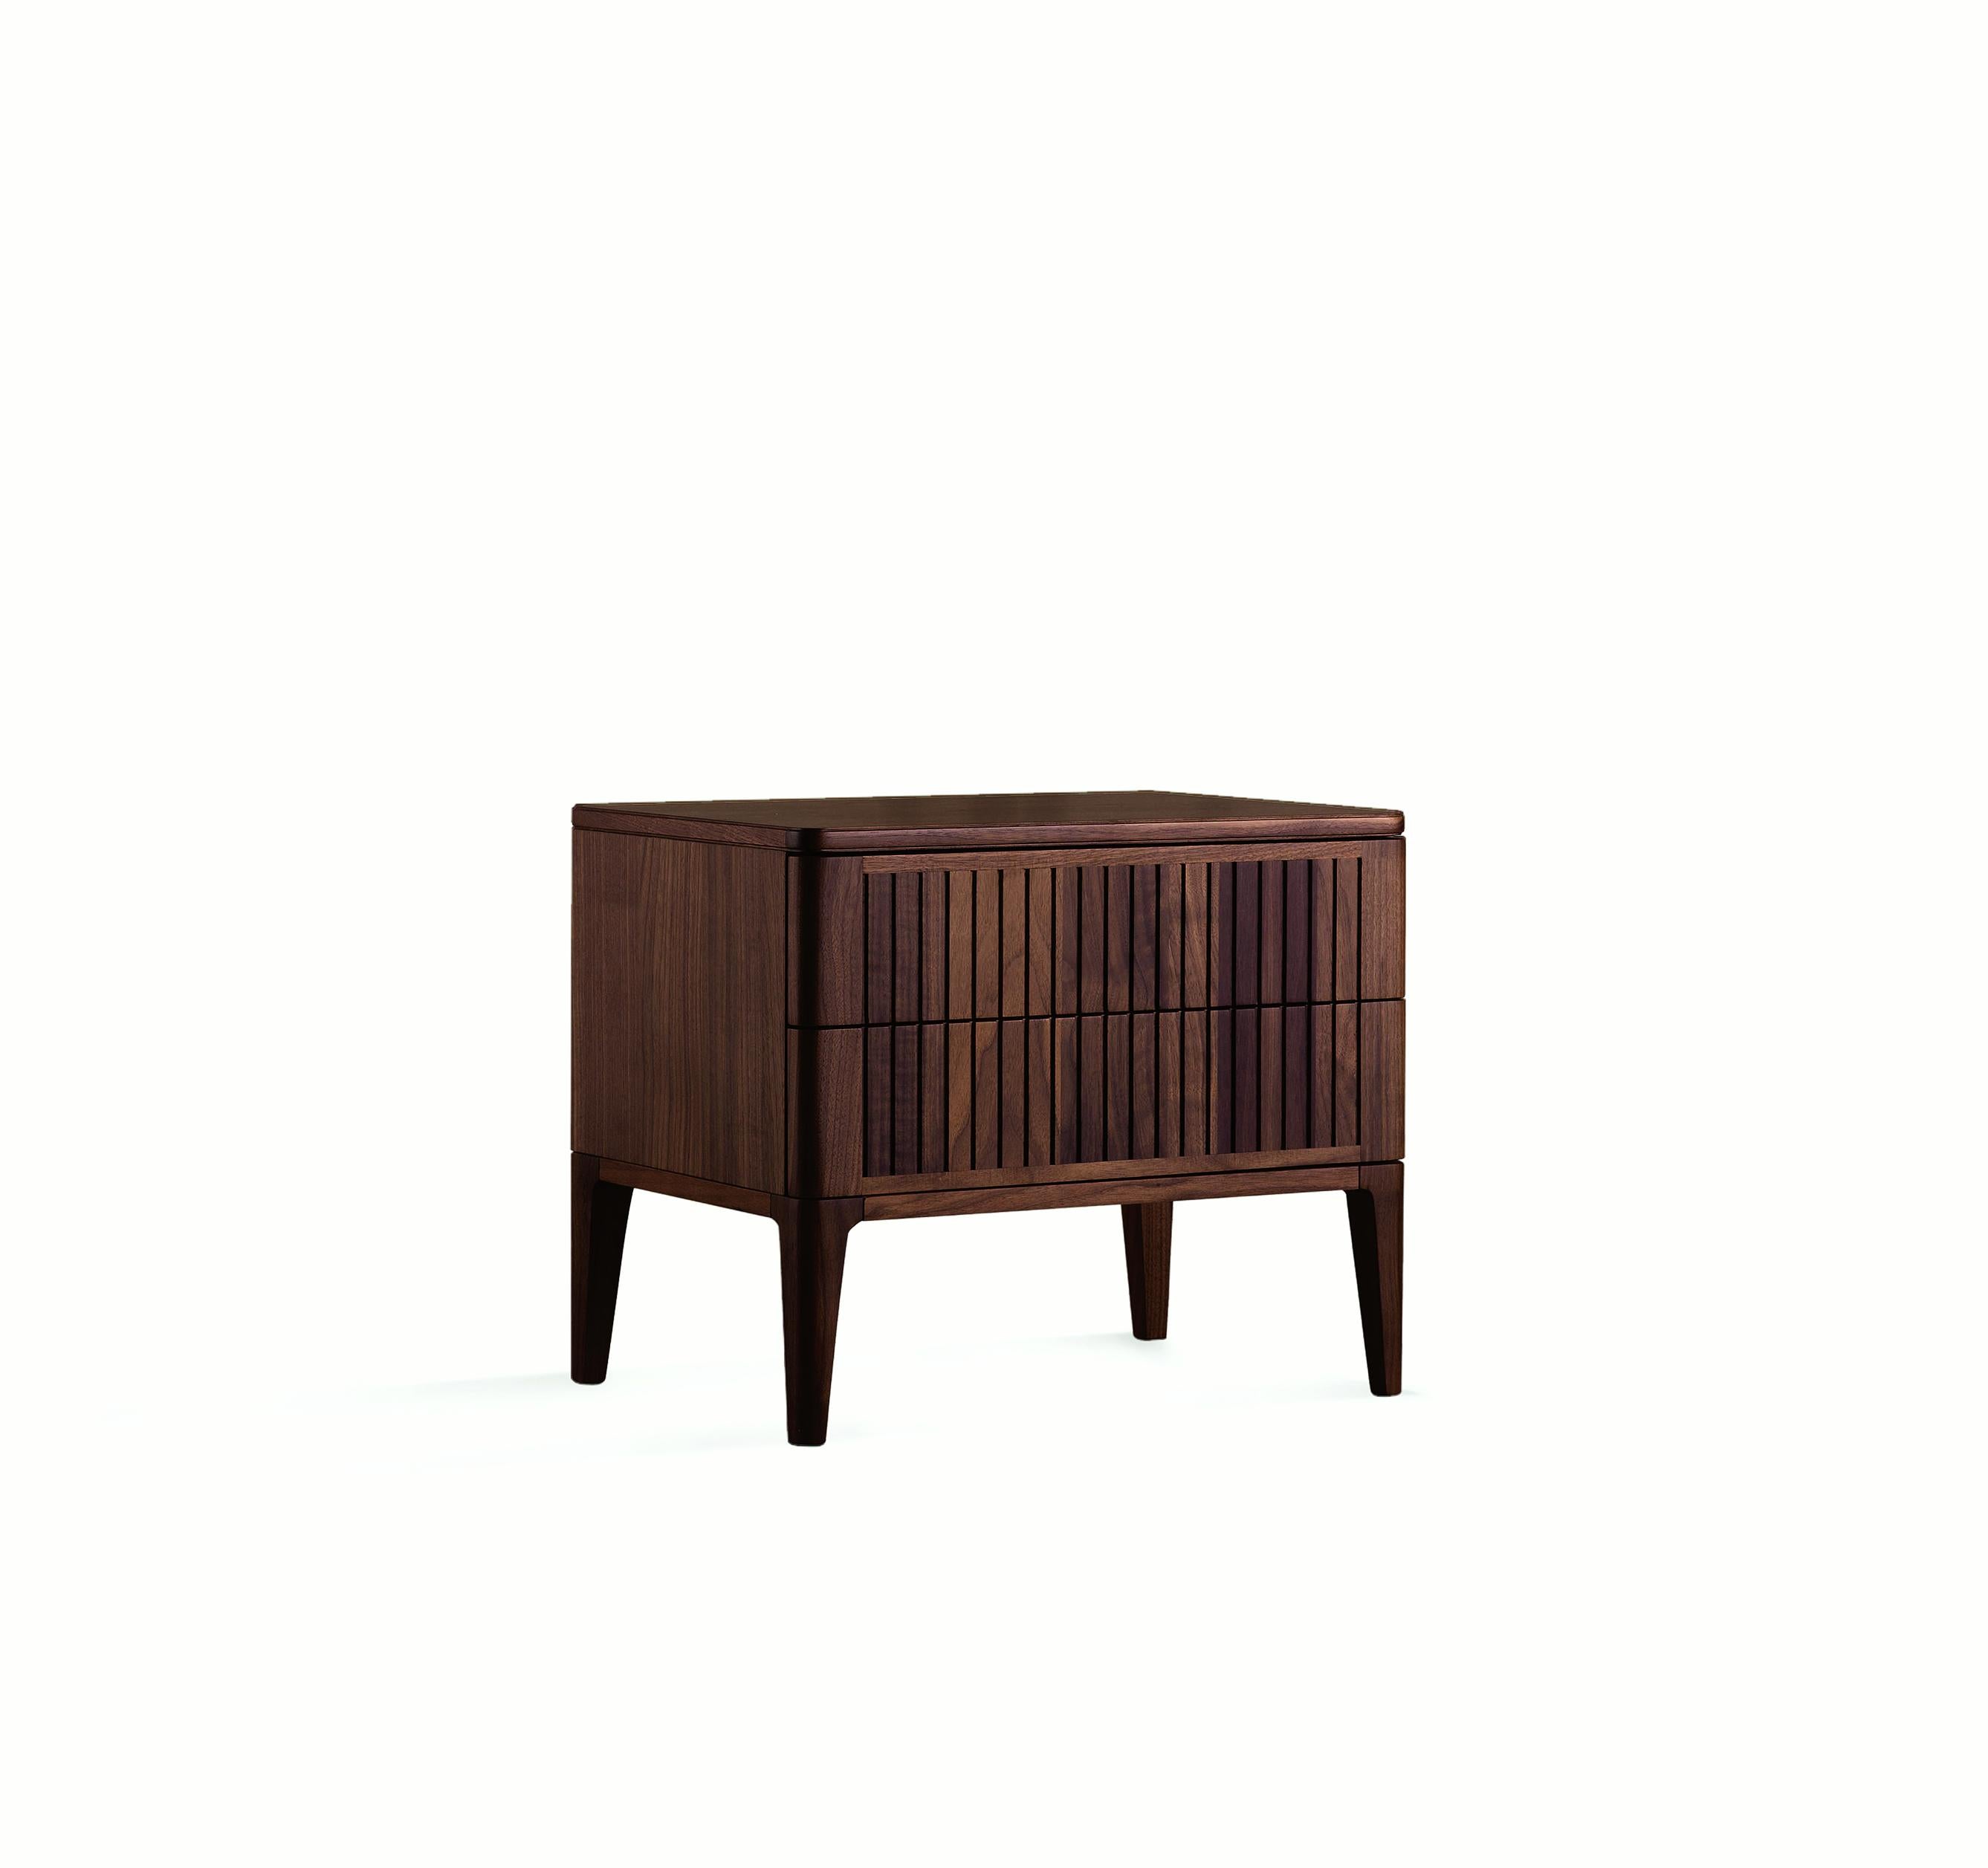 The Eleva solid wood bedside tables combine refined Italian design and skilled craftsmanship. The front doors, made of premium solid walnut with acrylic finish, create an intriguing contrast between light and shadow thanks to a linear style.